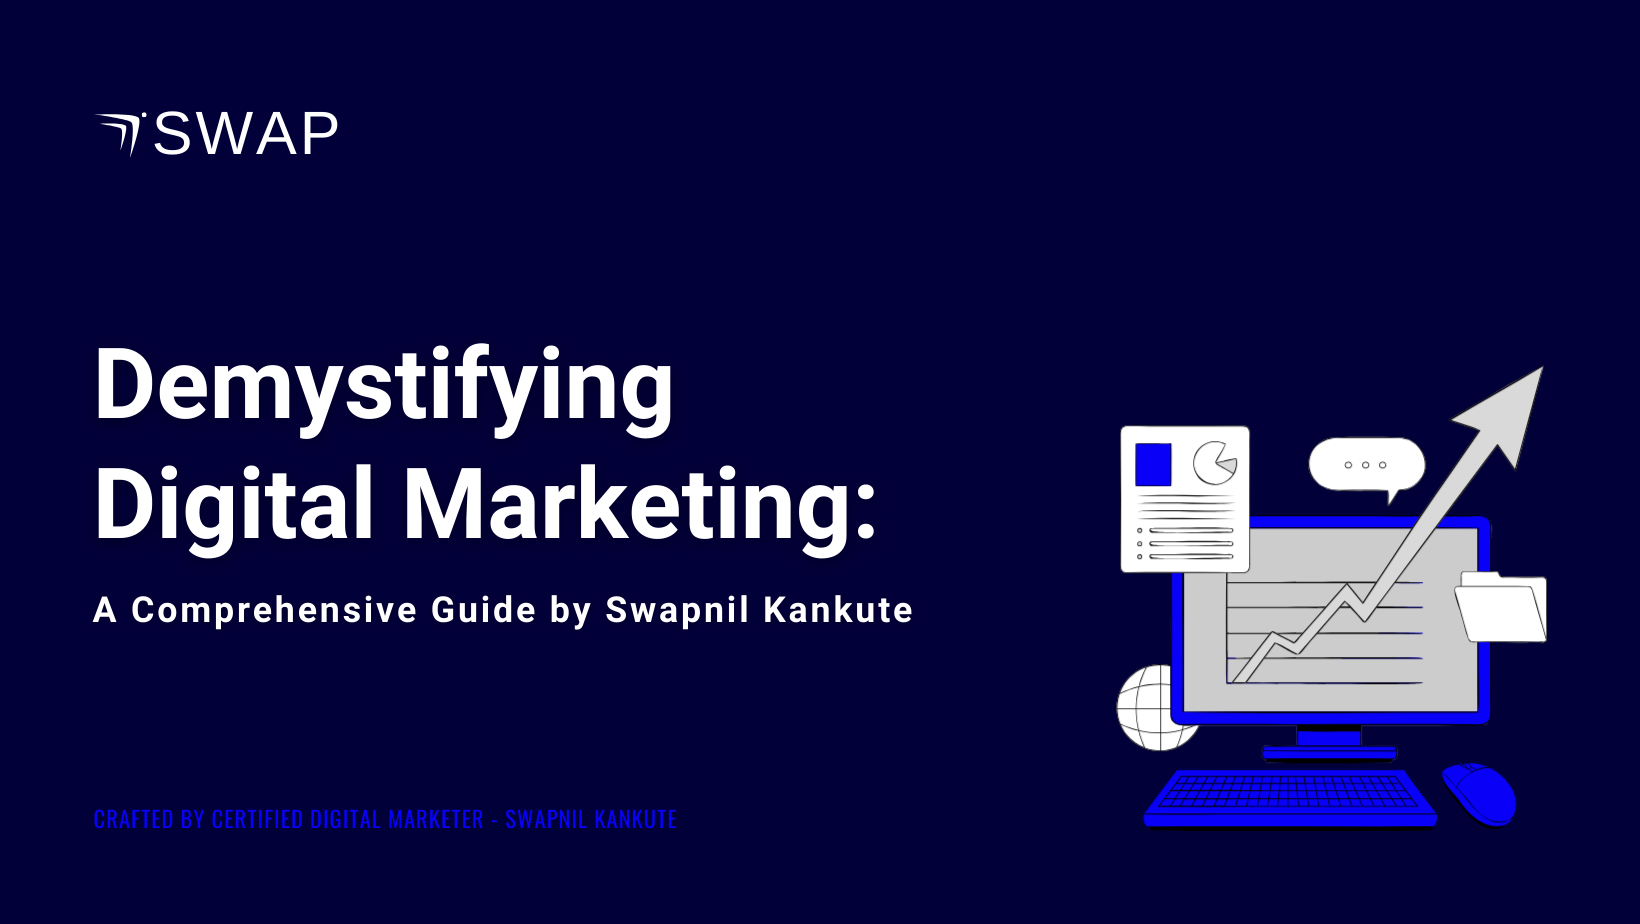 Demystifying Digital Marketing: A Comprehensive Guide by Swapnil Kankute